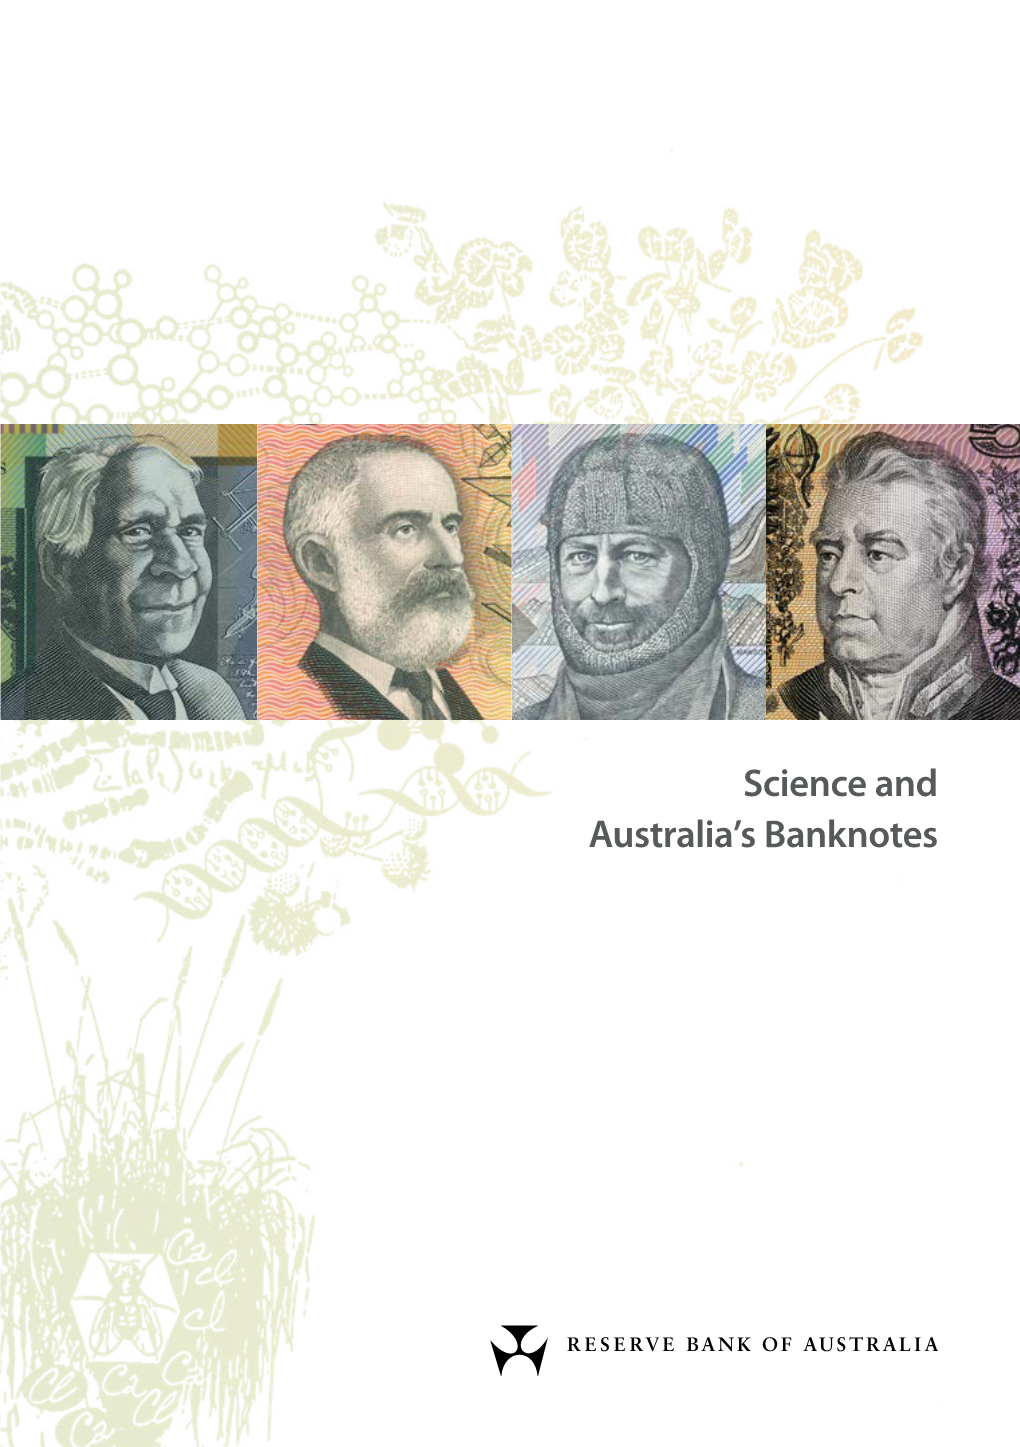 Science and Australia's Banknotes